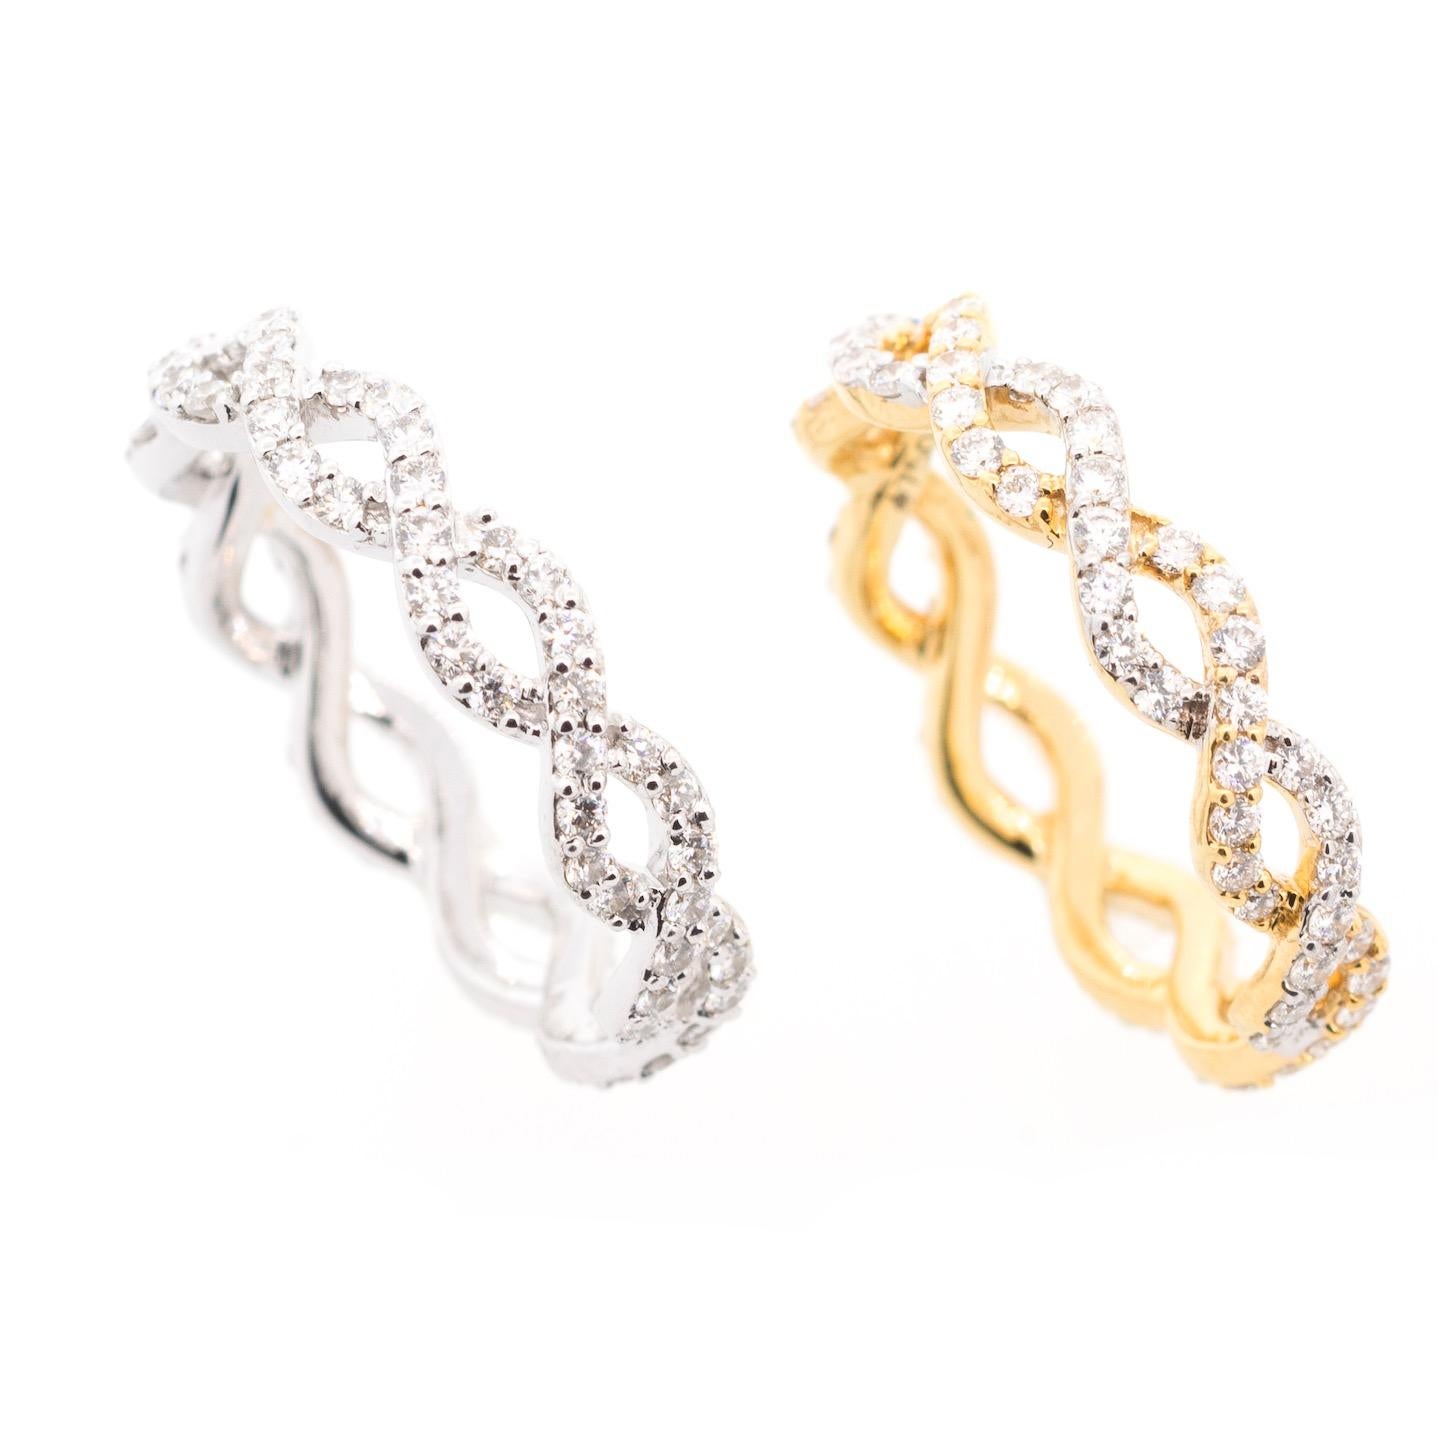 A collection of designs that are timeless and always sought season after season. Bracelets, rings, earrings and necklaces in white, yellow or rose gold adorned with white or black diamonds and at times with a dash of rubies. Worn stacked on their